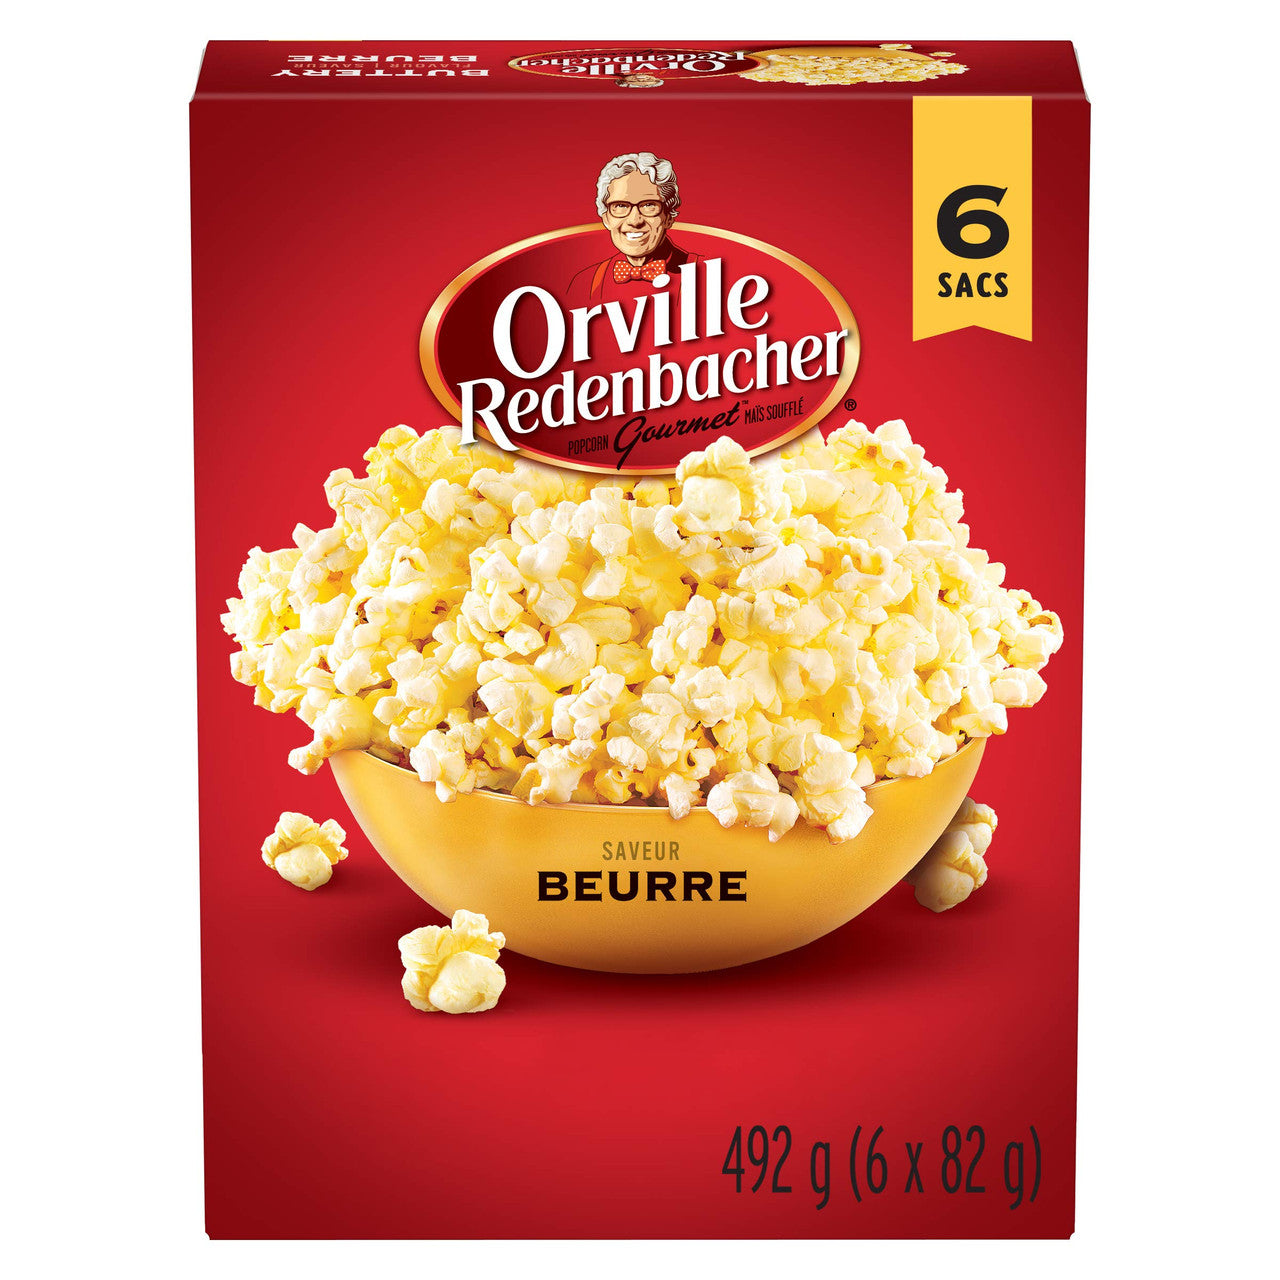 Orville Redenbacher's Buttery Flavor Popcorn, 492g/17.4oz Box, (6ct x 82g) {Imported from Canada}